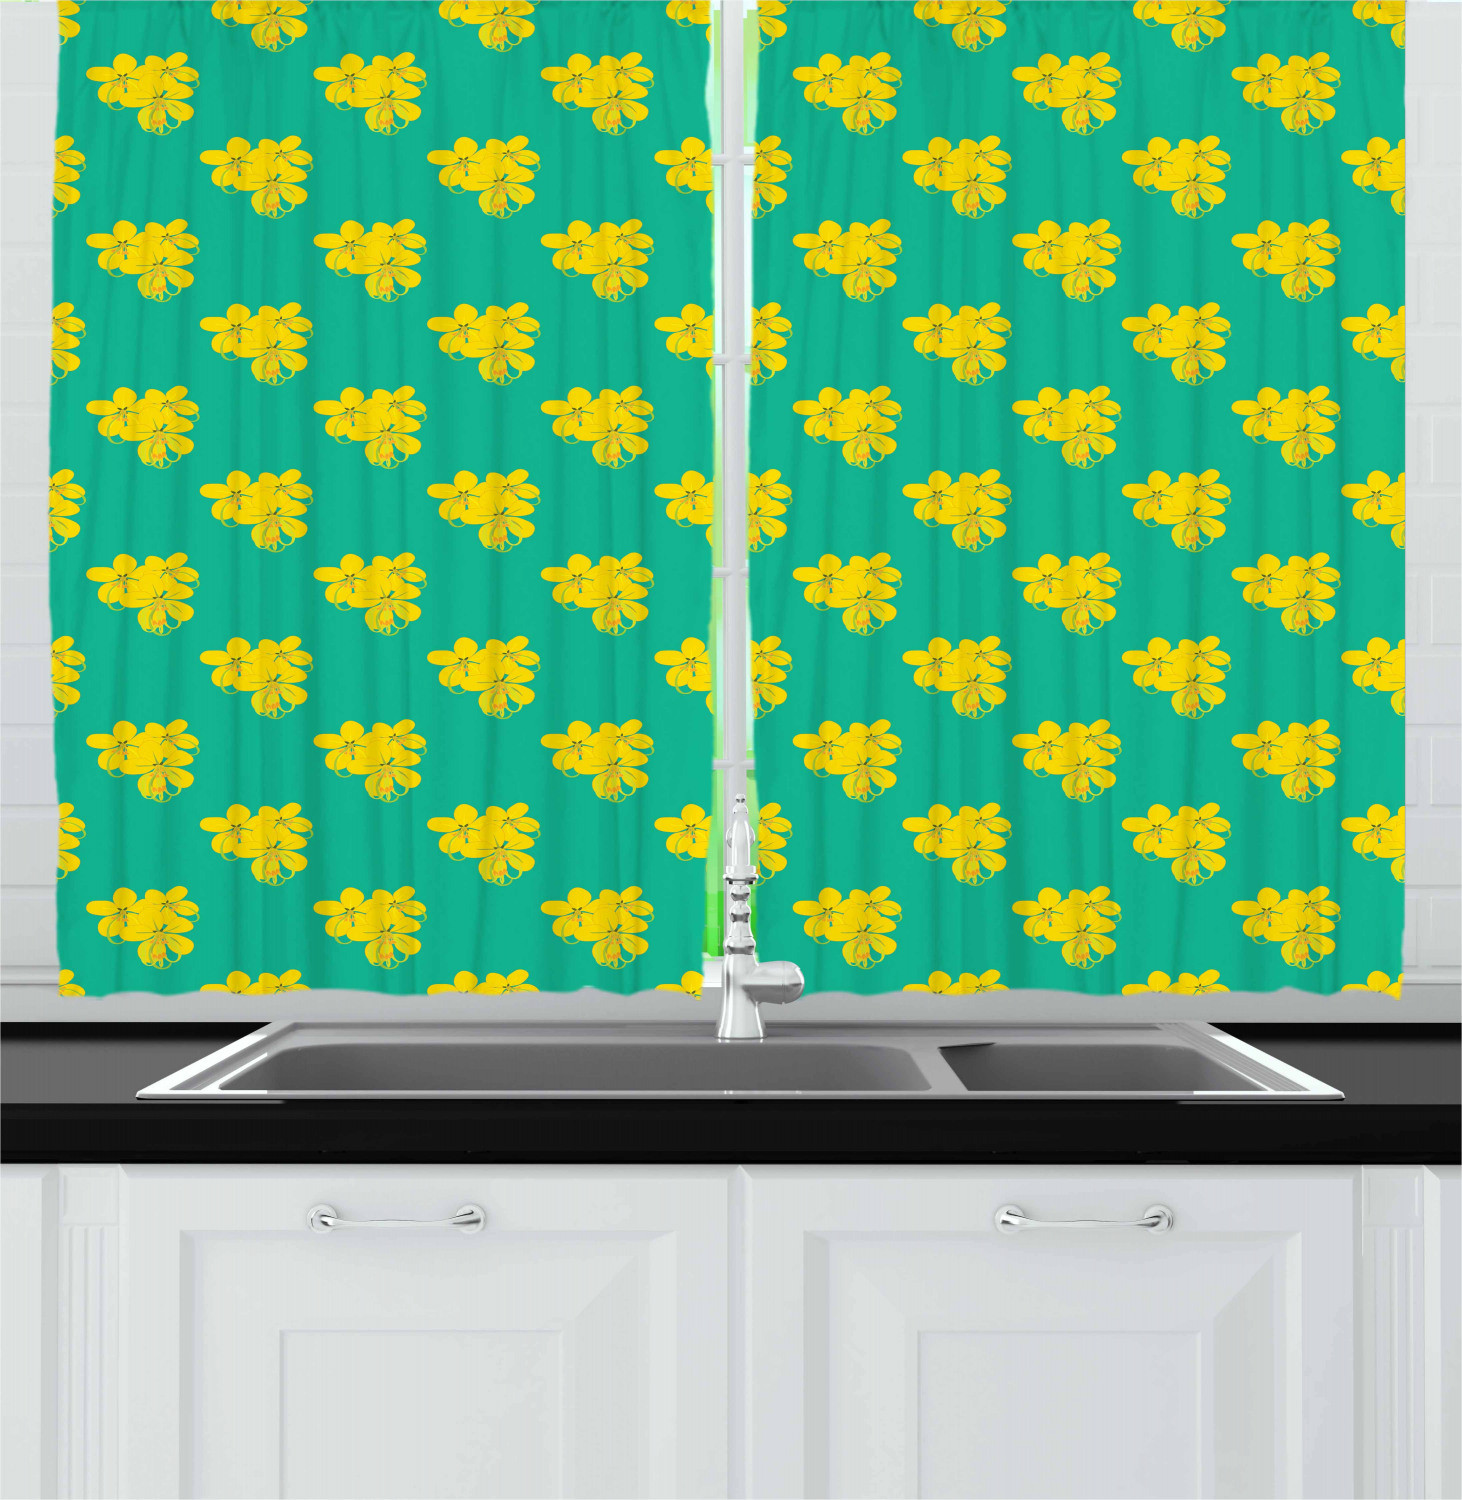 Blue and Yellow Kitchen Curtains Elegant Blue and Yellow Kitchen Curtains 2 Panel Set Window Drapes